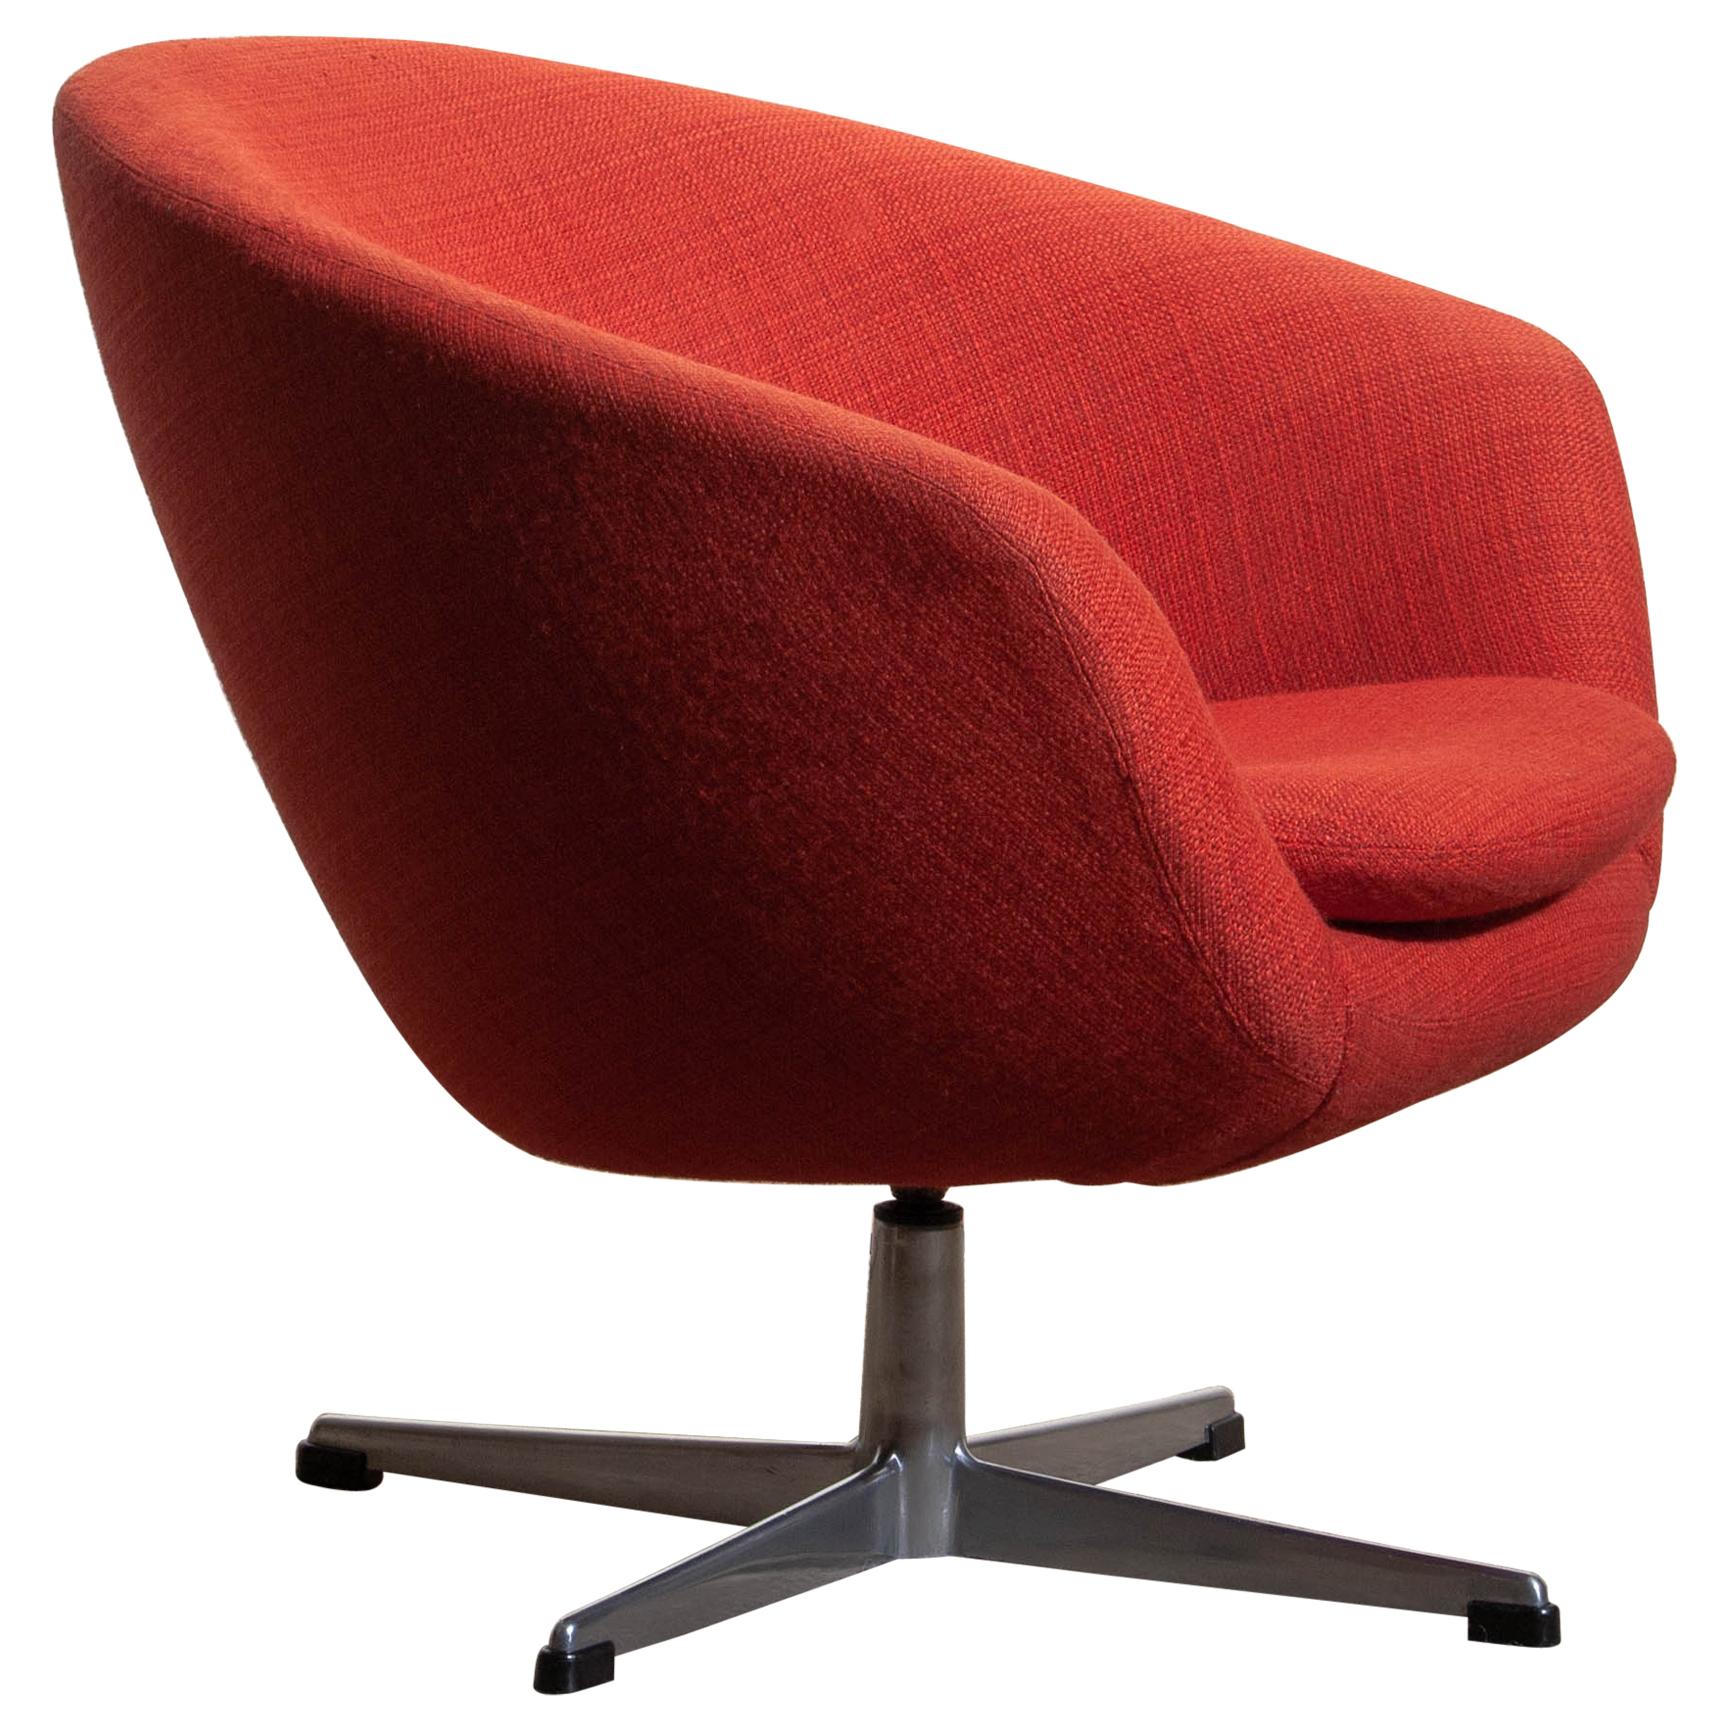 1960s, Swivel Lounge Chair by Carl Eric Klote for Overman, Denmark